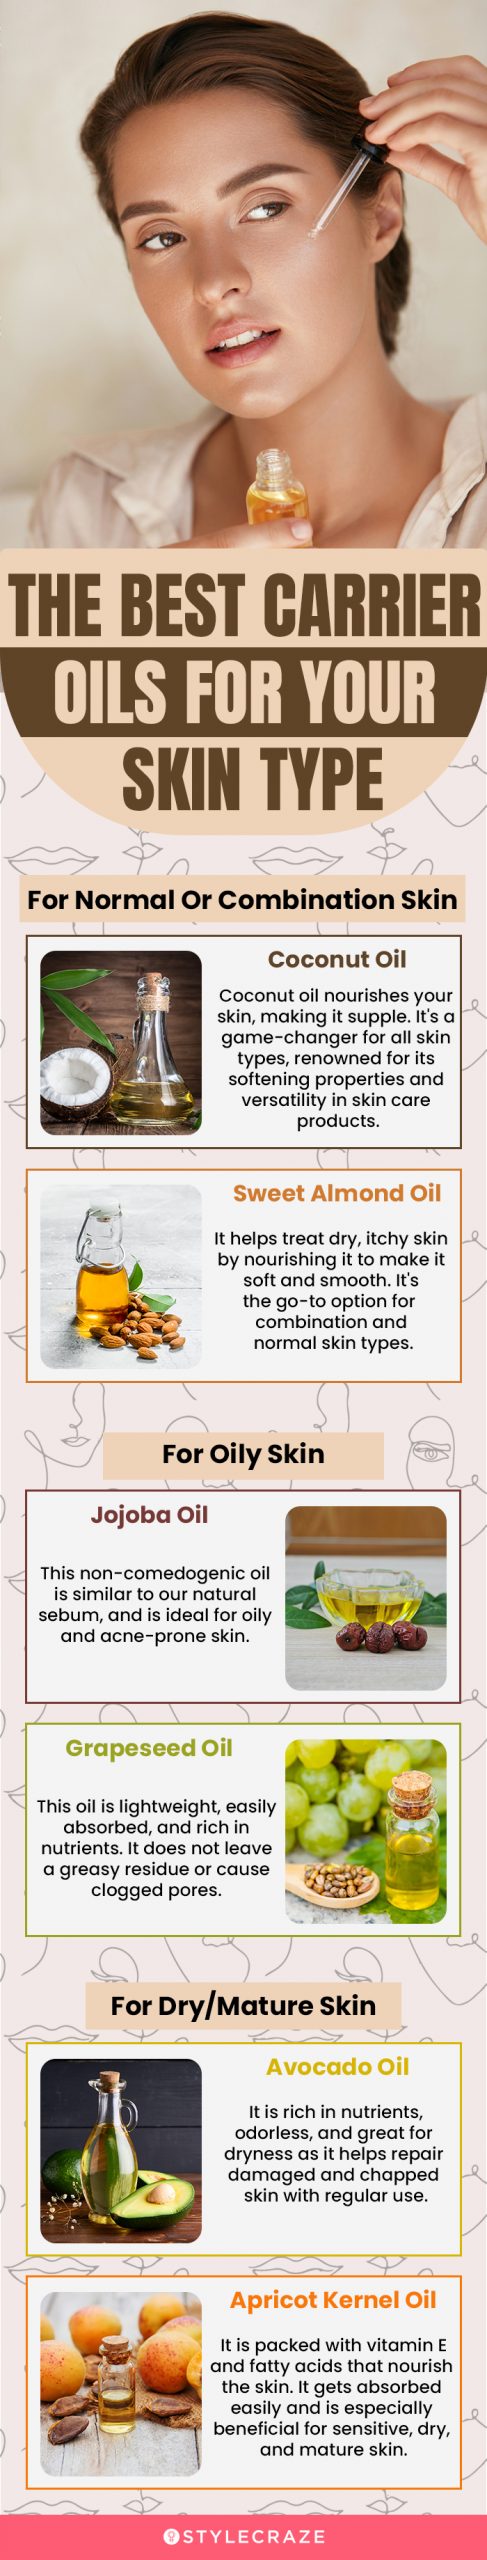 How to Choose the Right Carrier Oil for Homemade Skin Care